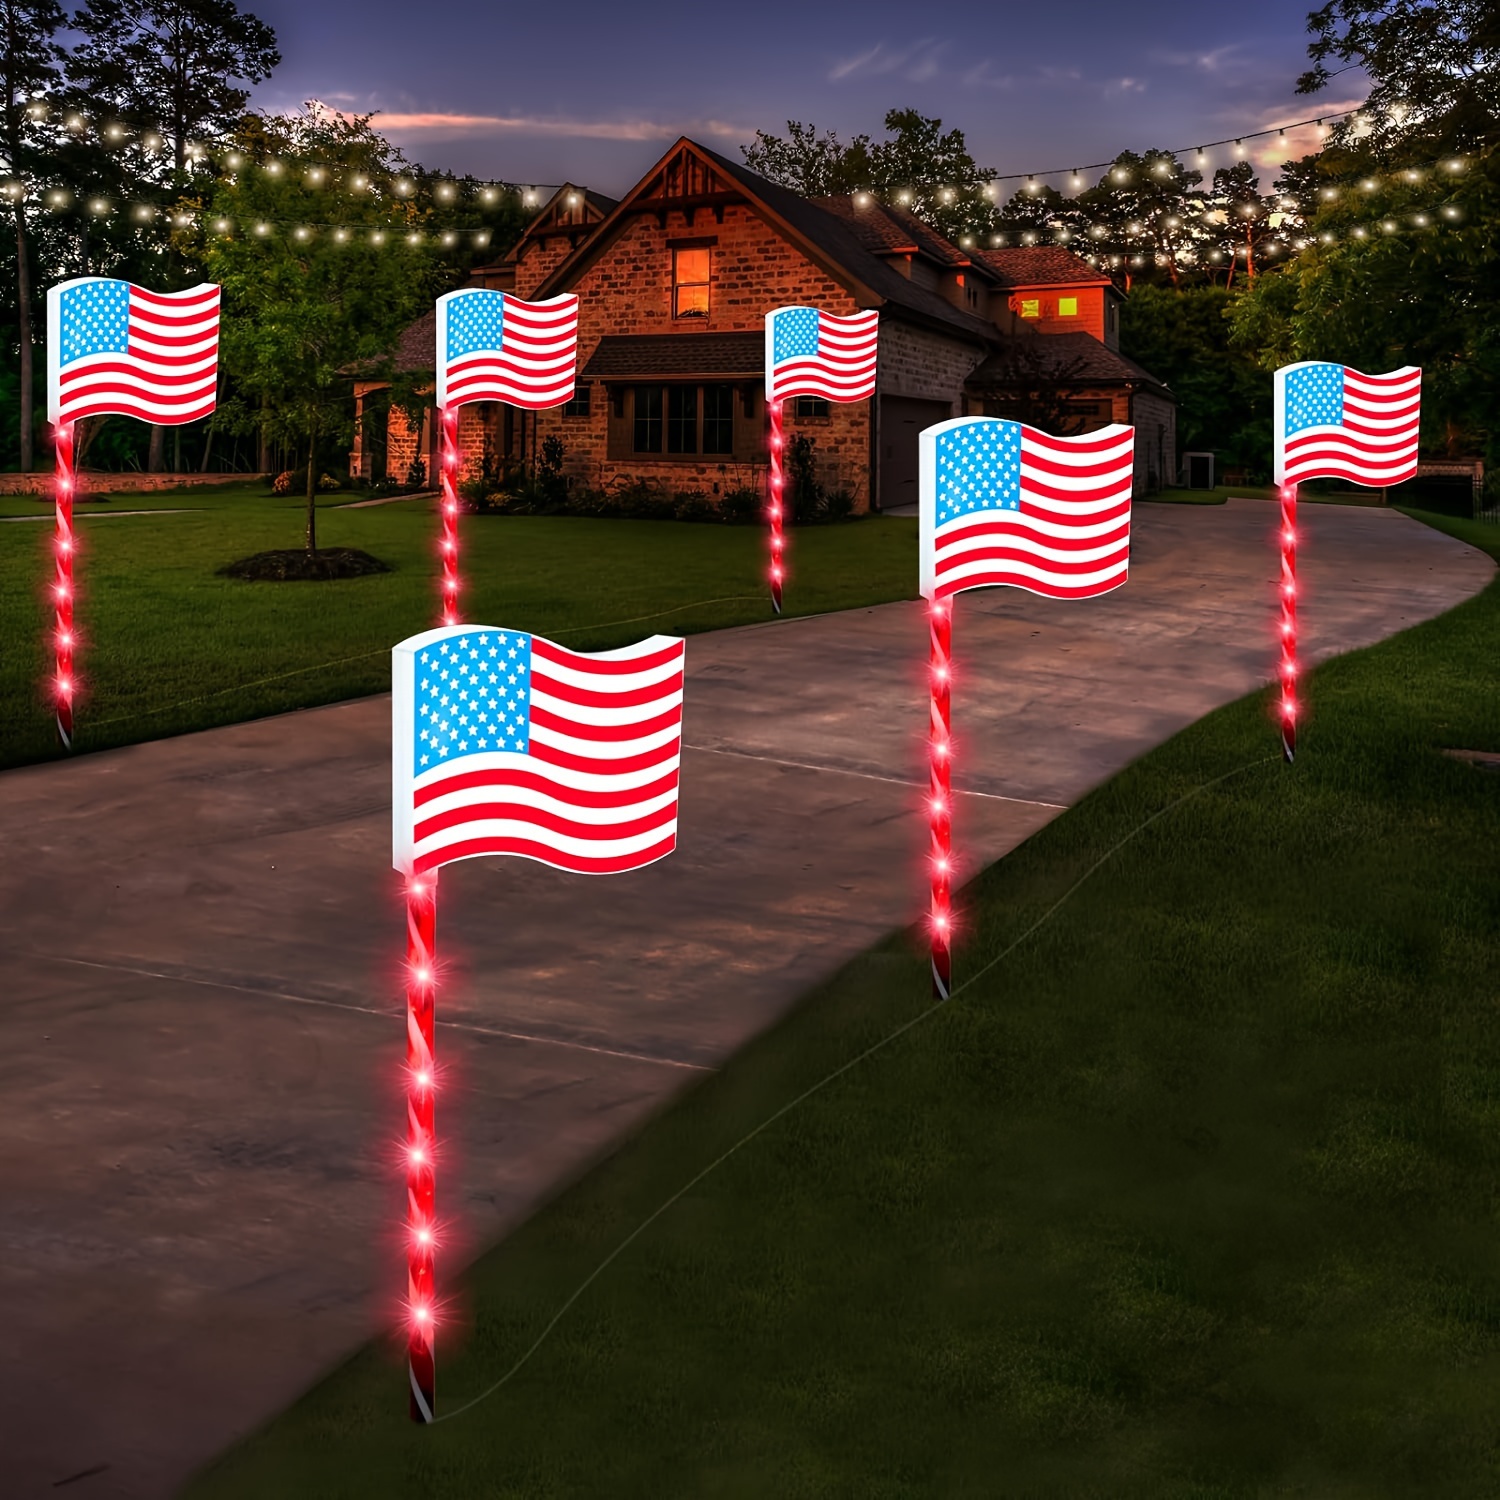 

6 Lights 4th Of July Decorations Outdoor American Flag Led Pathway Lights, Patriotic Decorations Outside Red White And Blue Lights For Memorial Day Independence Day Yard Lawn Path Walkway Garden